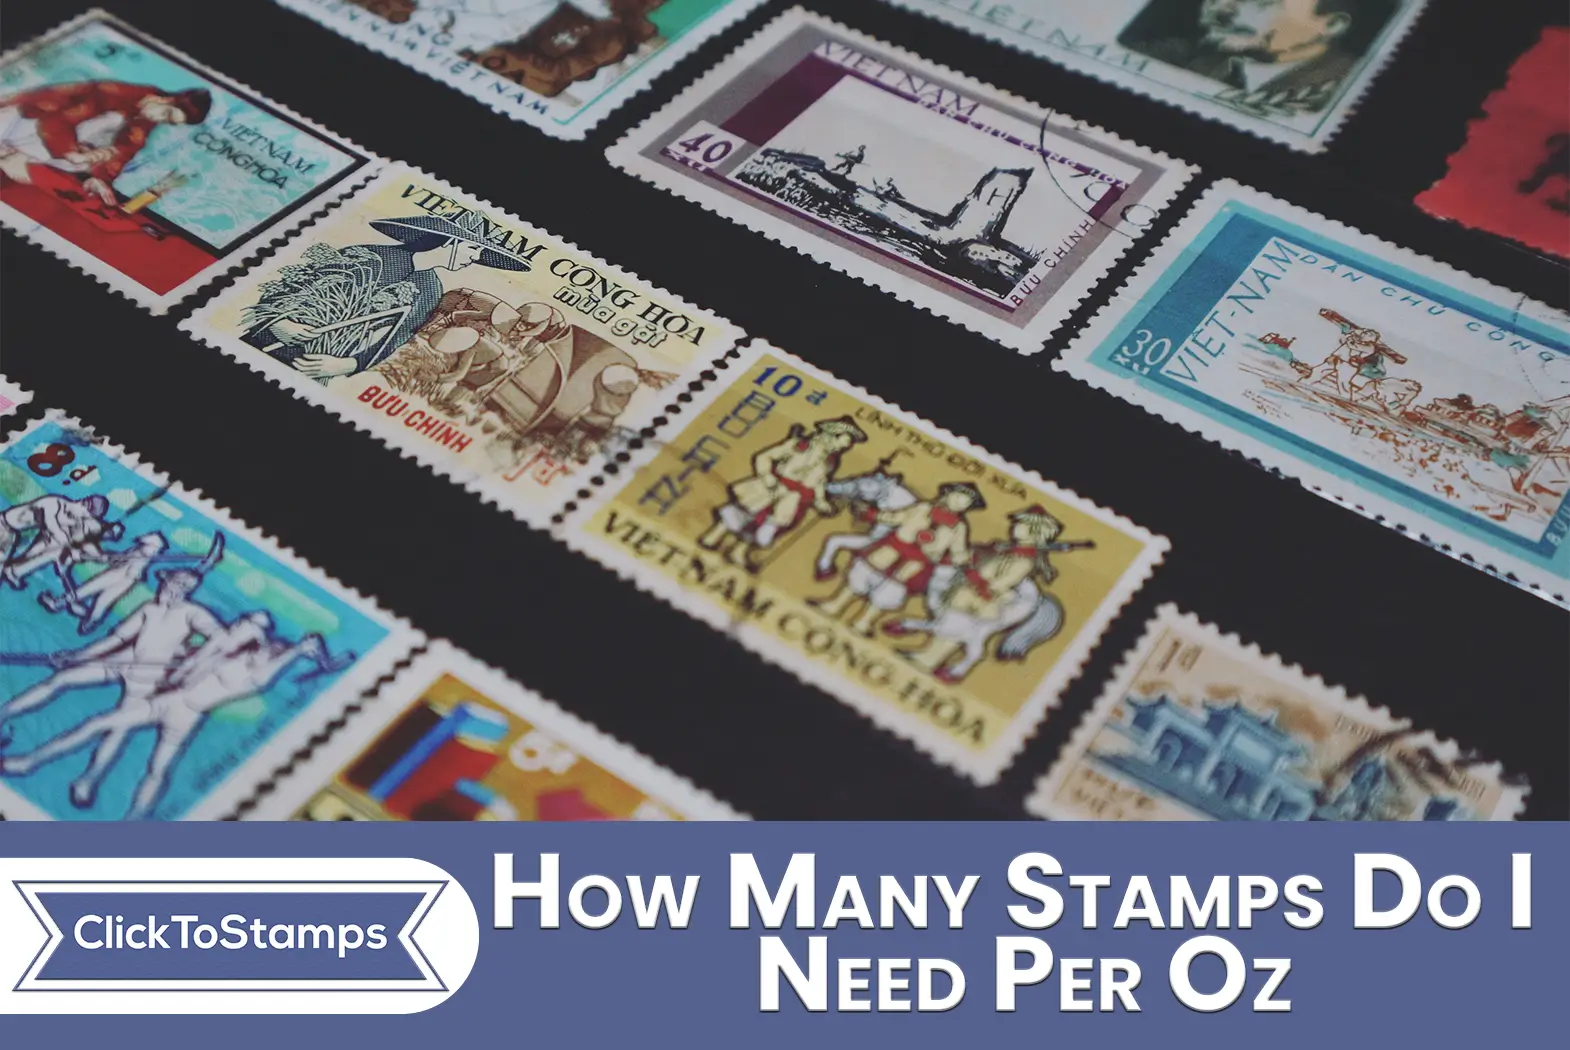 How Many Stamps Do I Need Per Oz